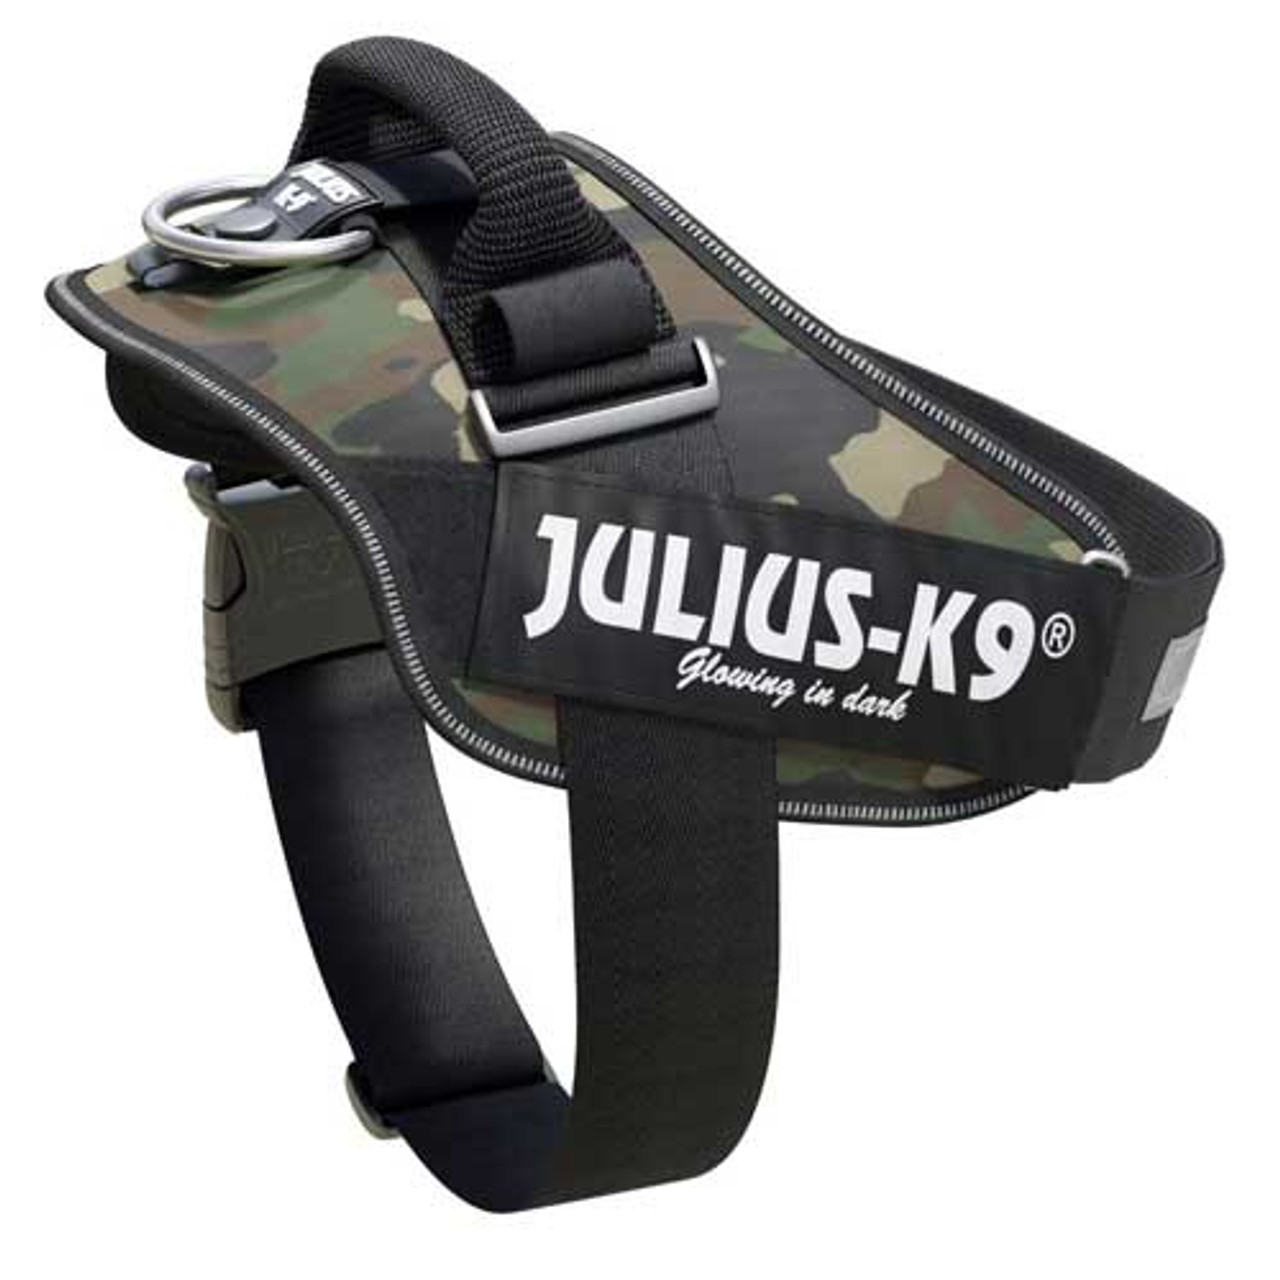 Julius-K9 IDC-Powerharness For Dogs Size: 1, Camouflage